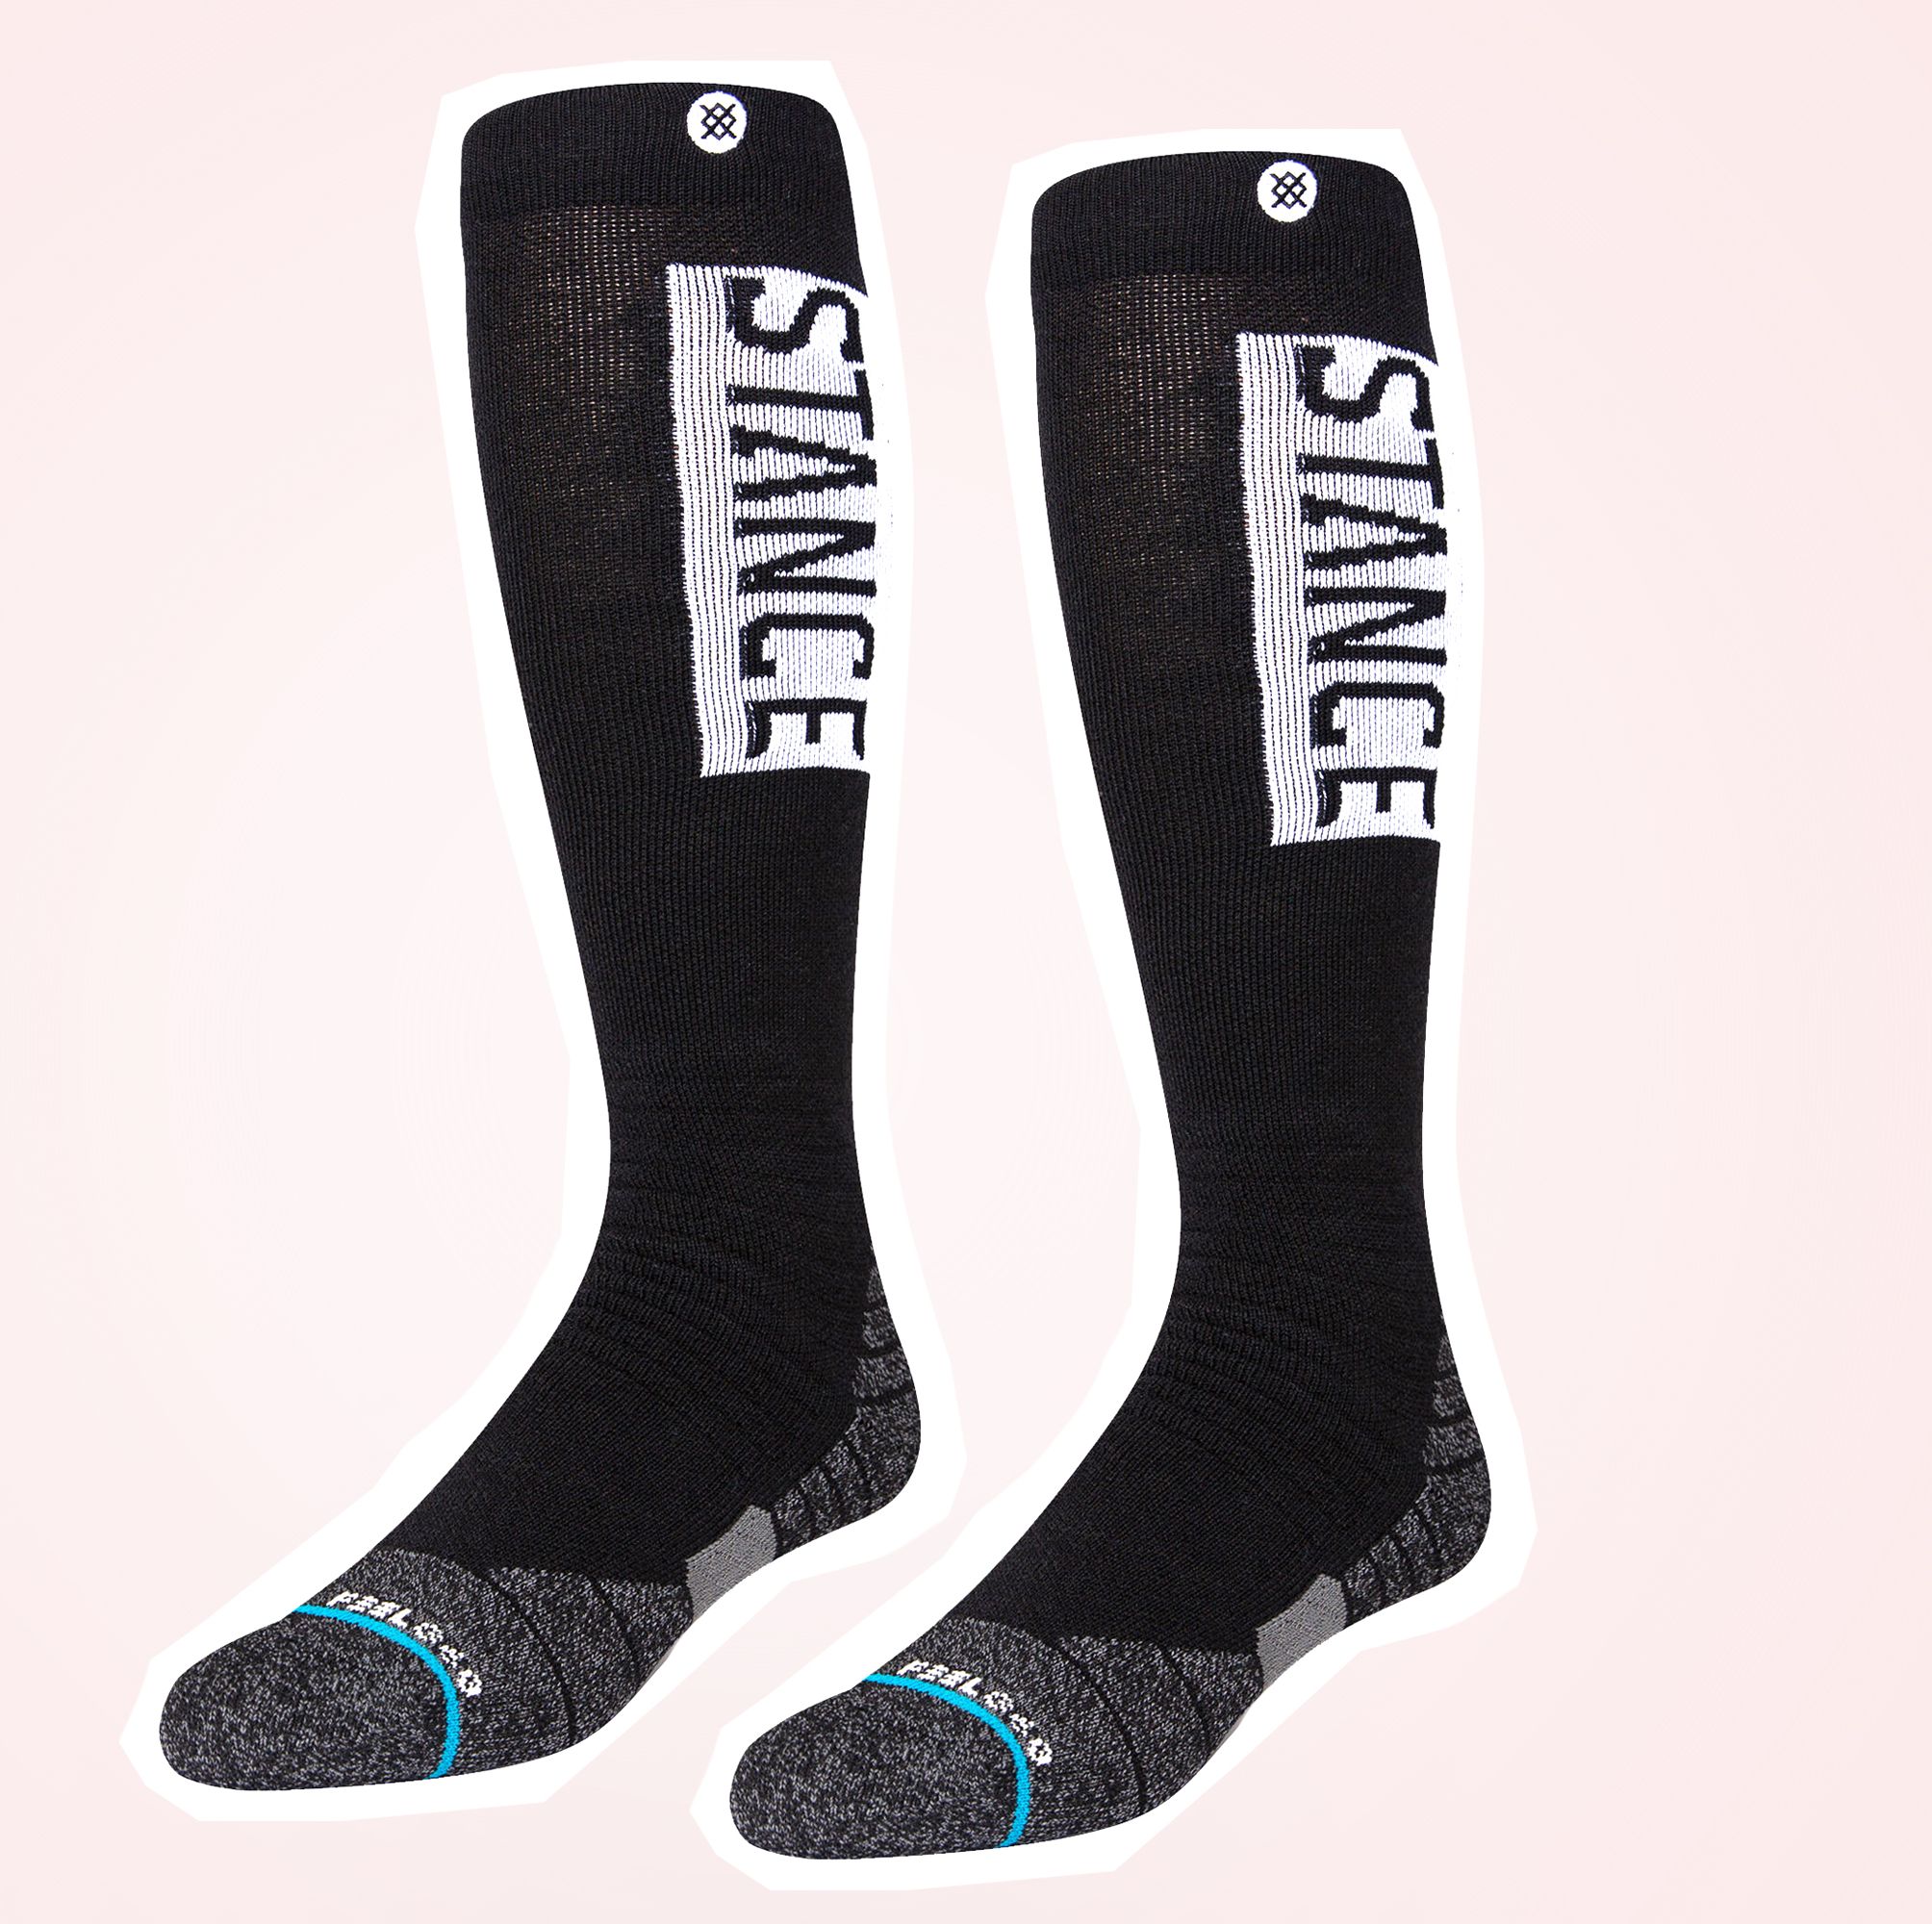 Keep Your Feet Cozy in the Warmest Socks for Winter